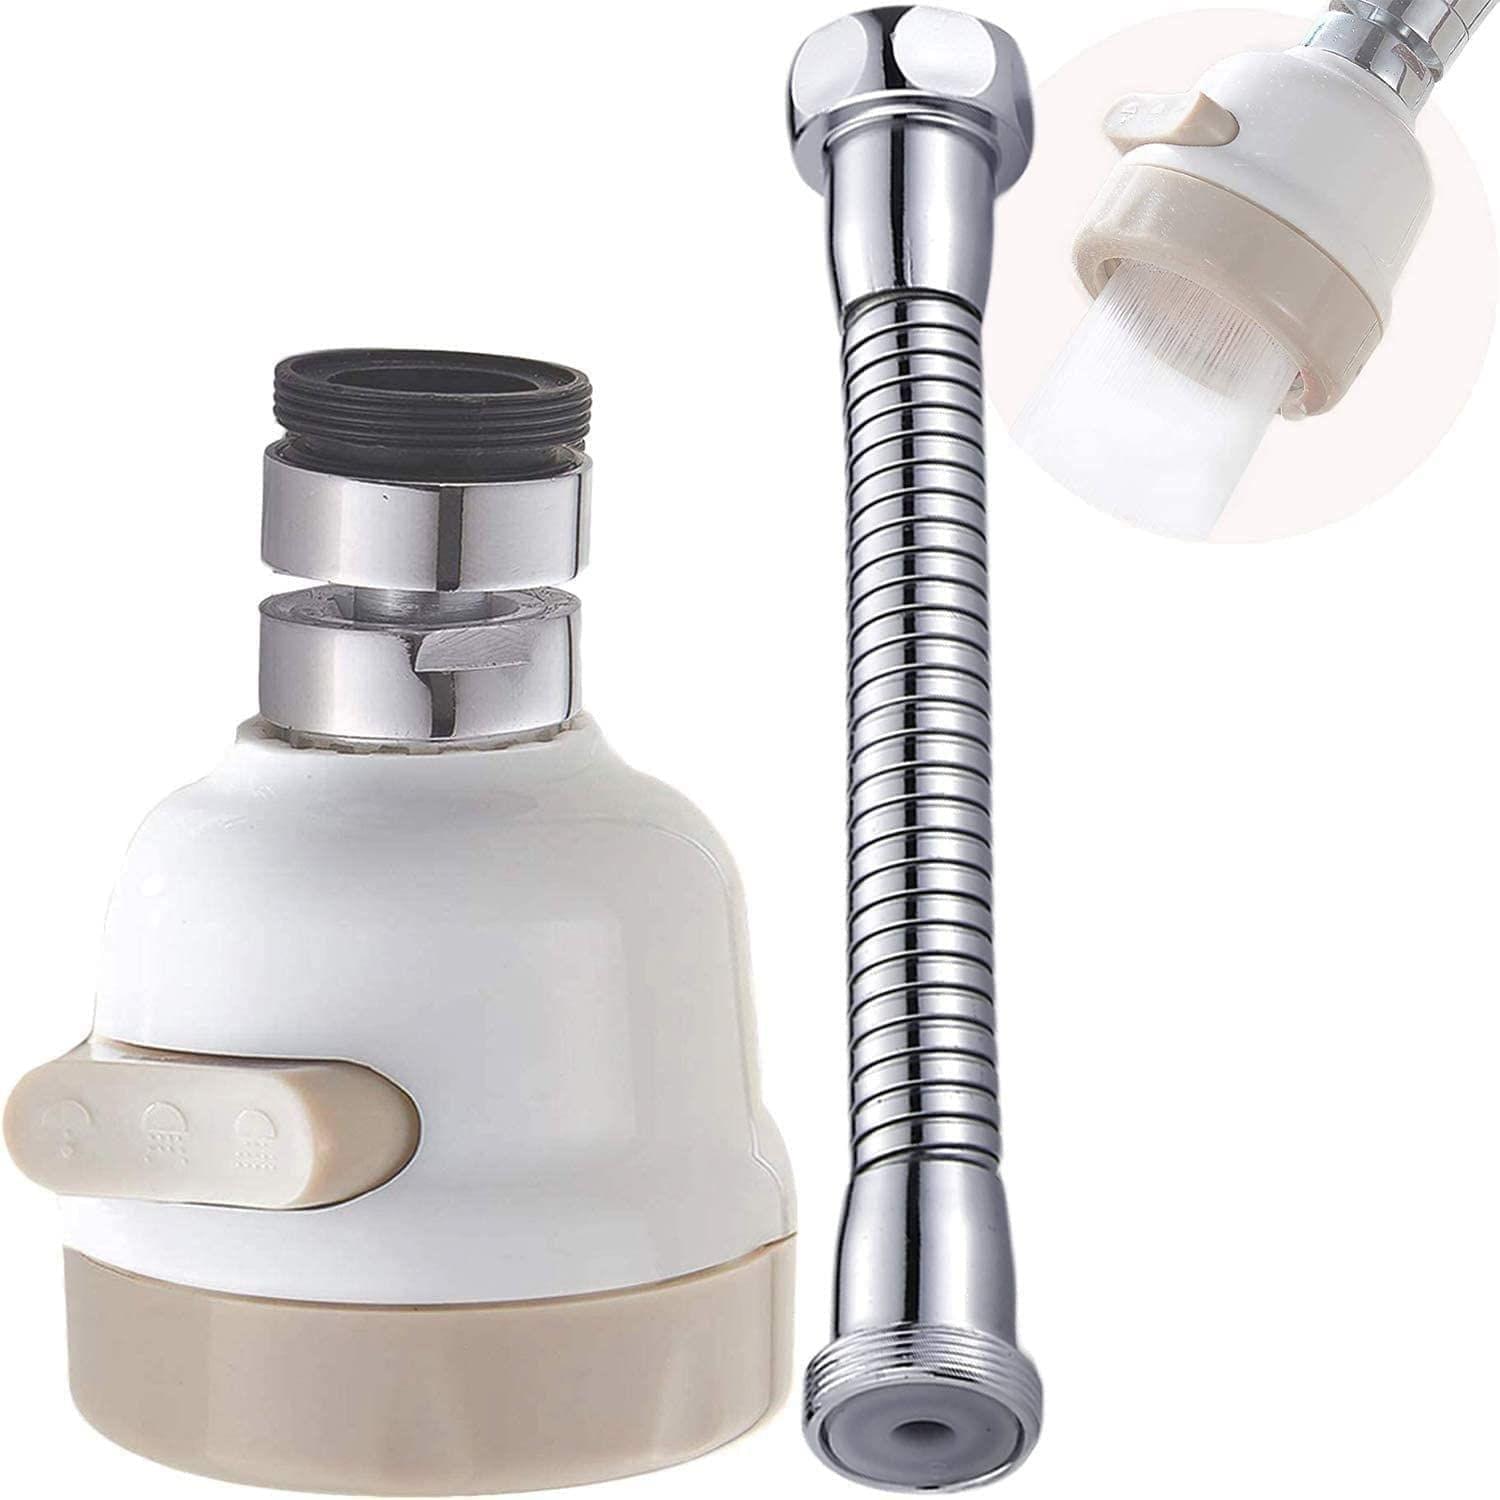 Store4hope Kitchen Water Shower Tap Faucet Tap Aerator